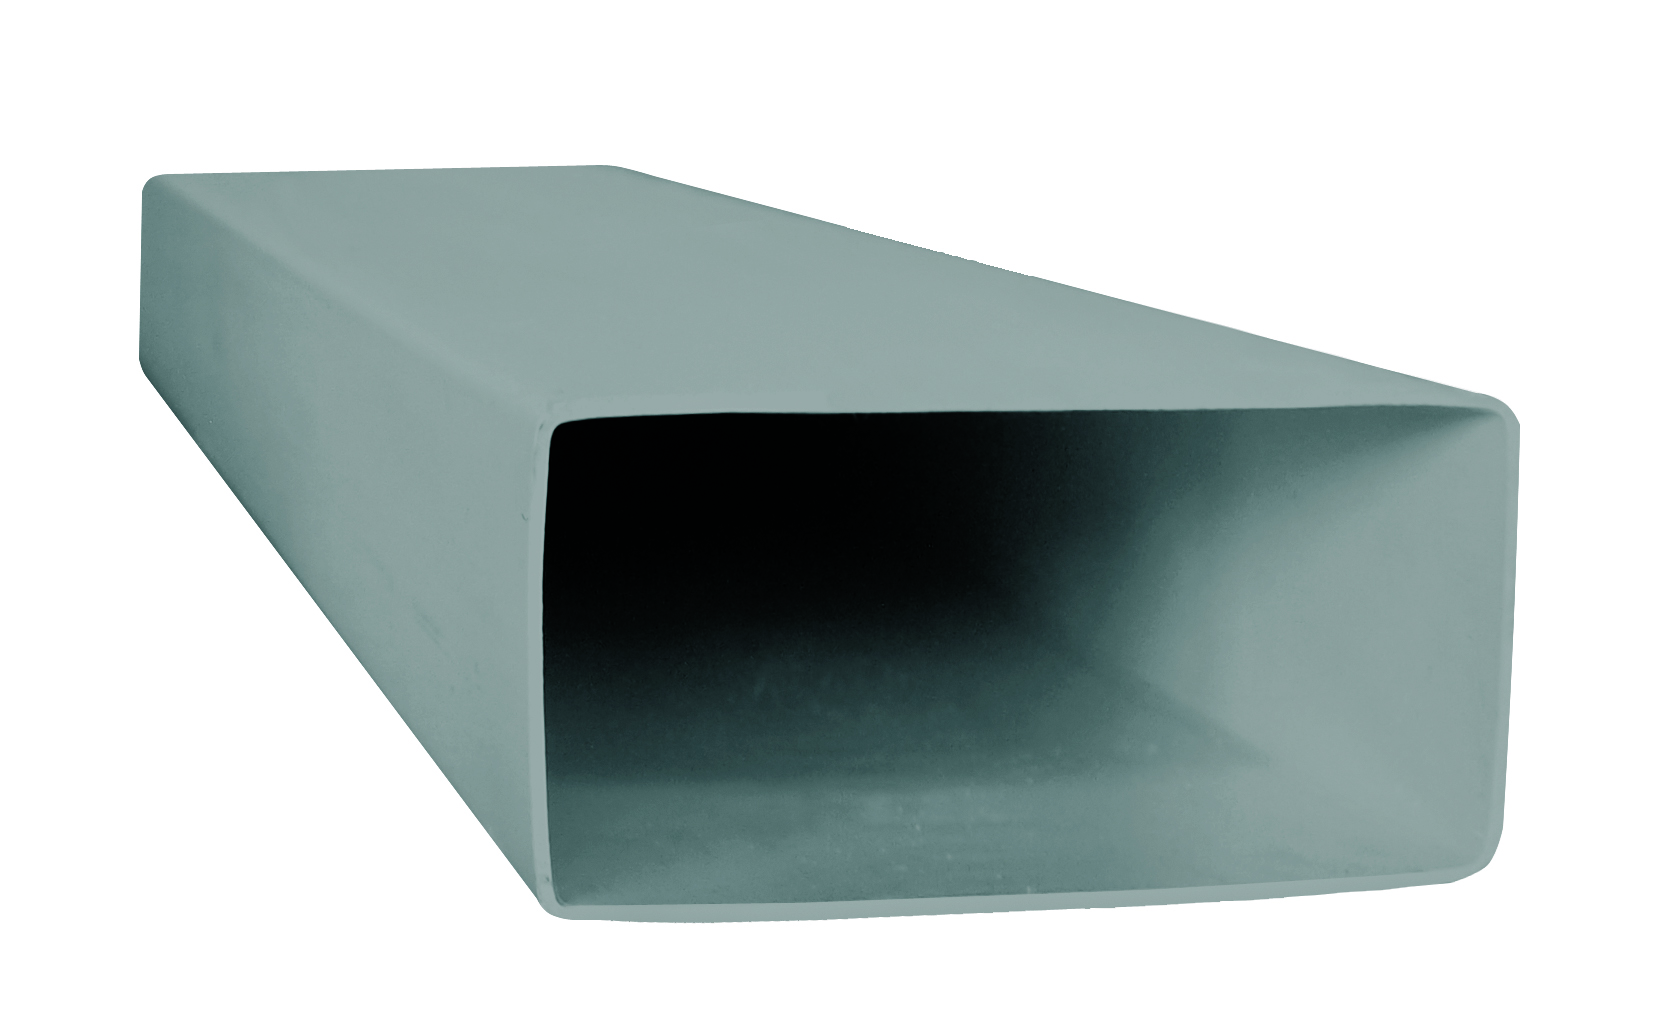 Monsoon Rectangular Ducting 110mm x 54mm Duct & Accessories